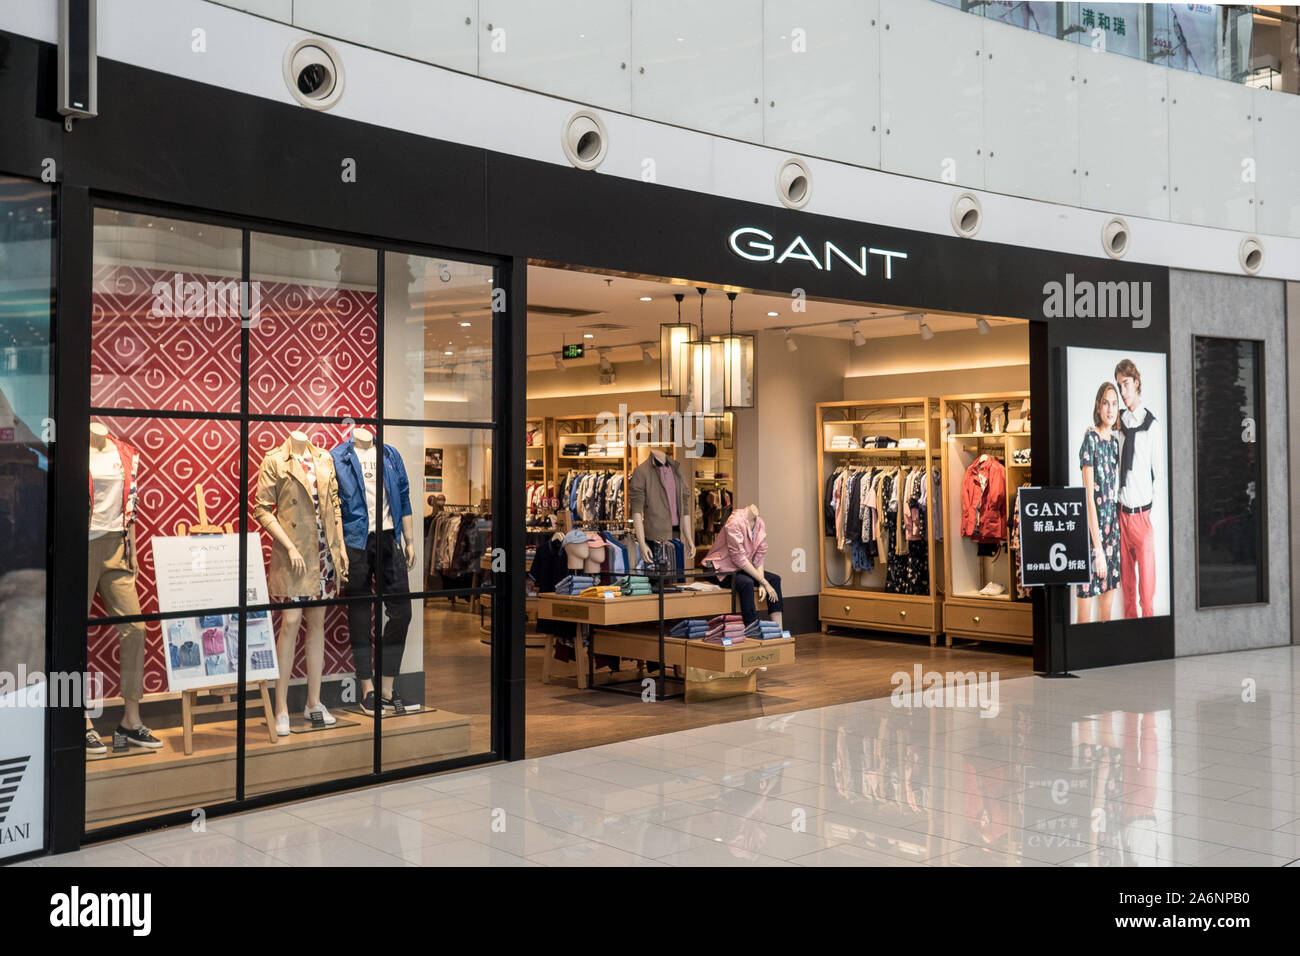 Gant Store Front in Chinese Shopping mall, Dalian, China, 8 April 2019  Stock Photo - Alamy